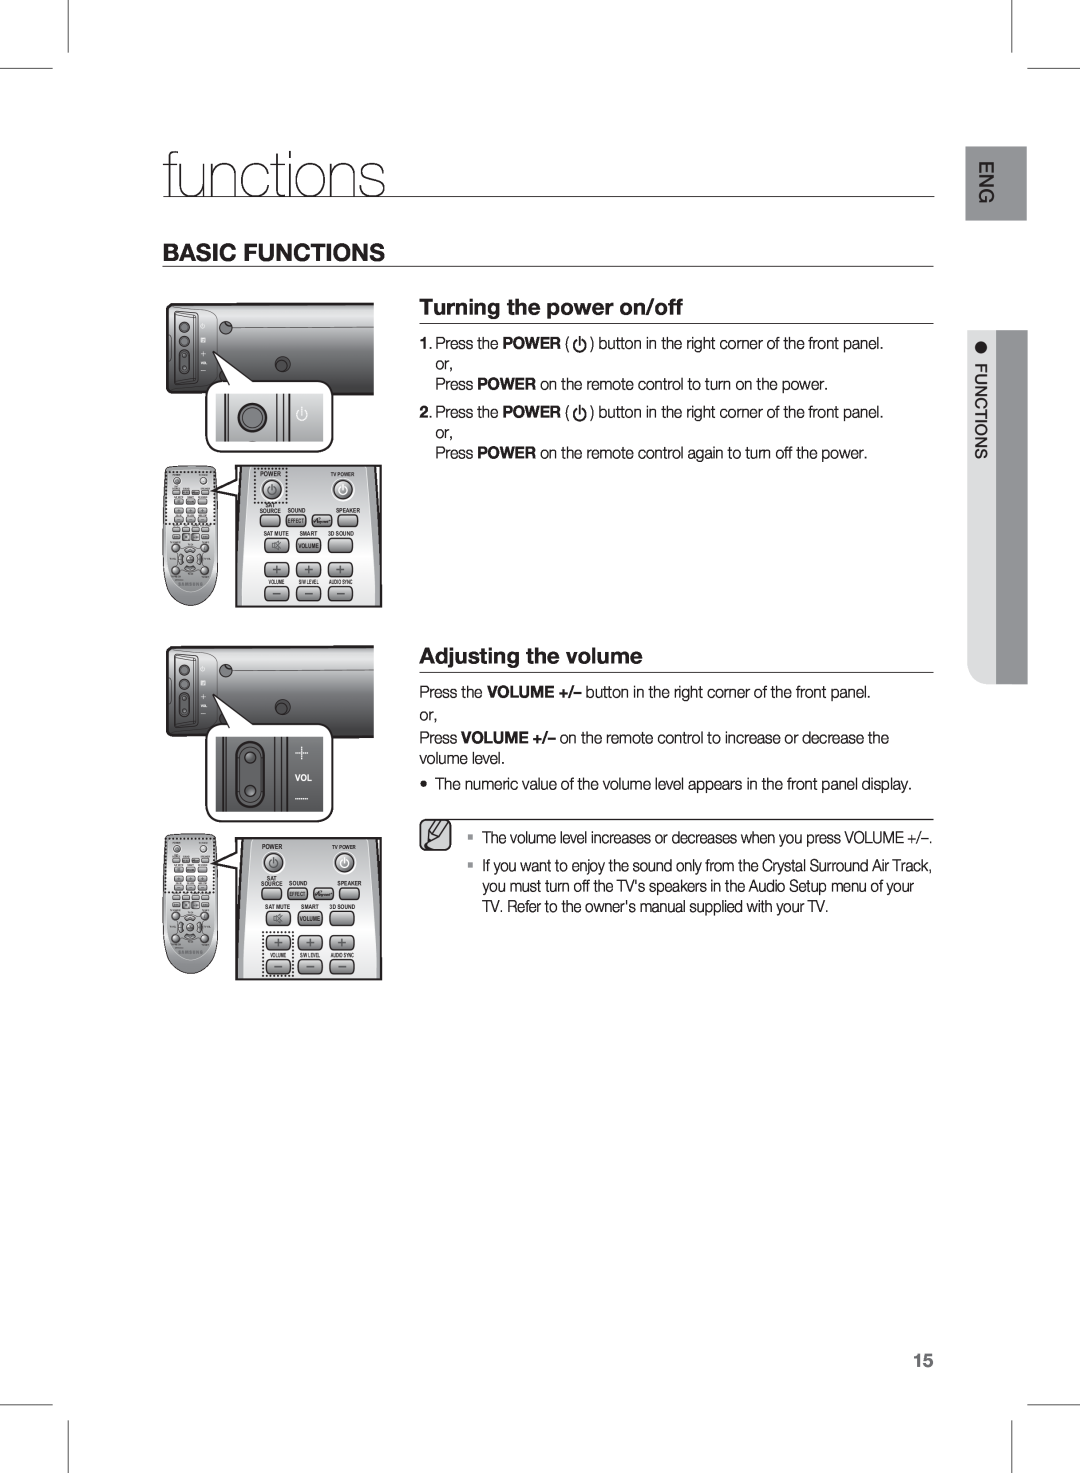 Samsung HW-E450C user manual basic functions, Turning the power on/off, Adjusting the volume, EnG sn 